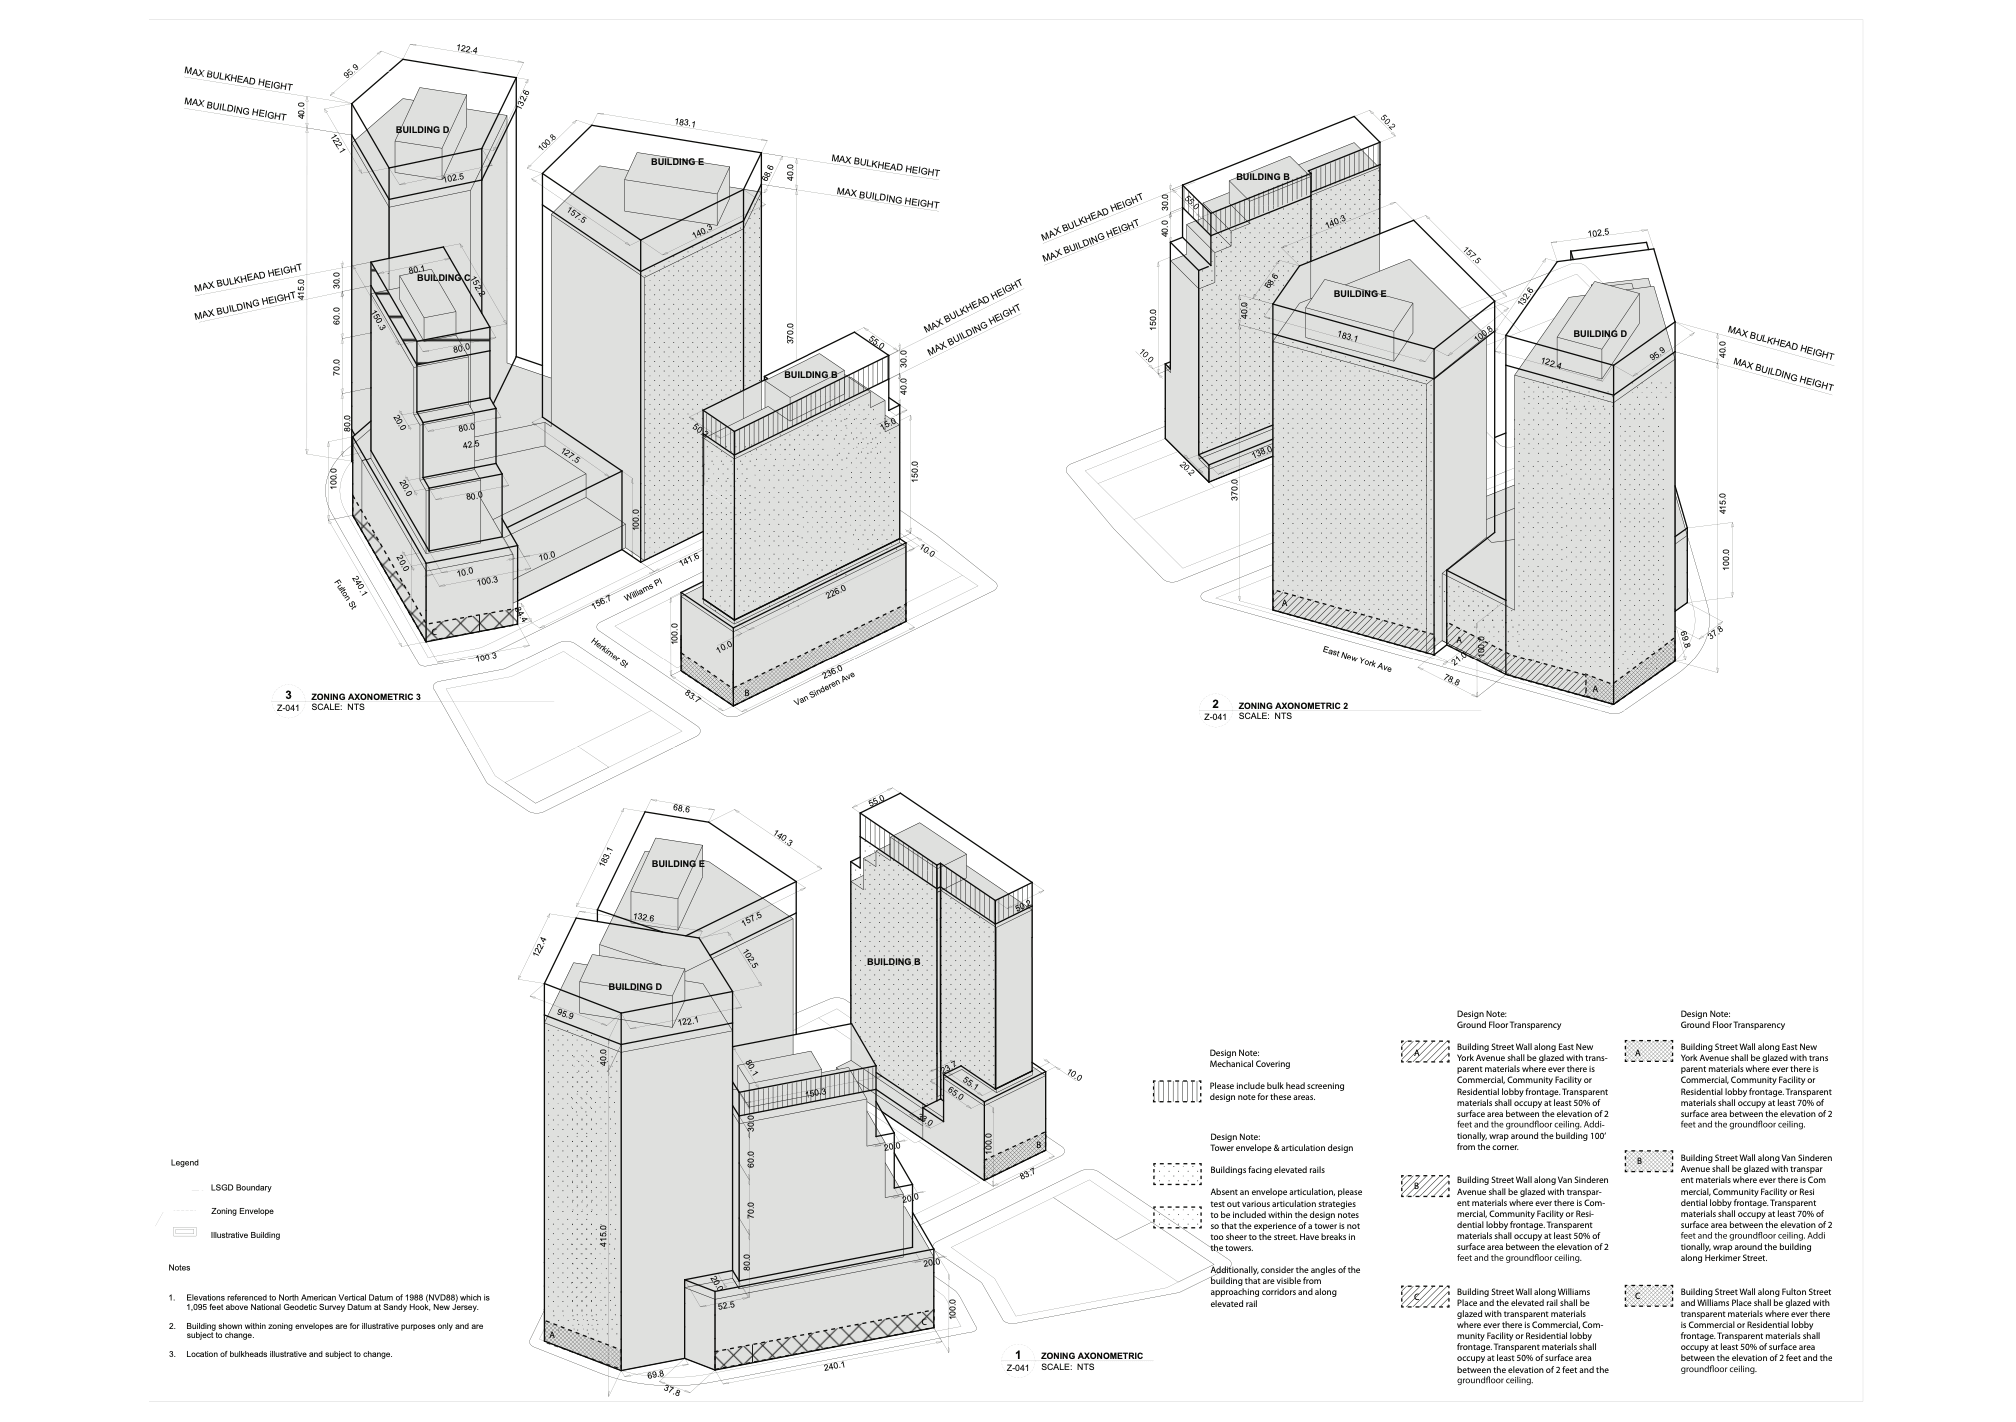 drawings of the proposed buildings scale